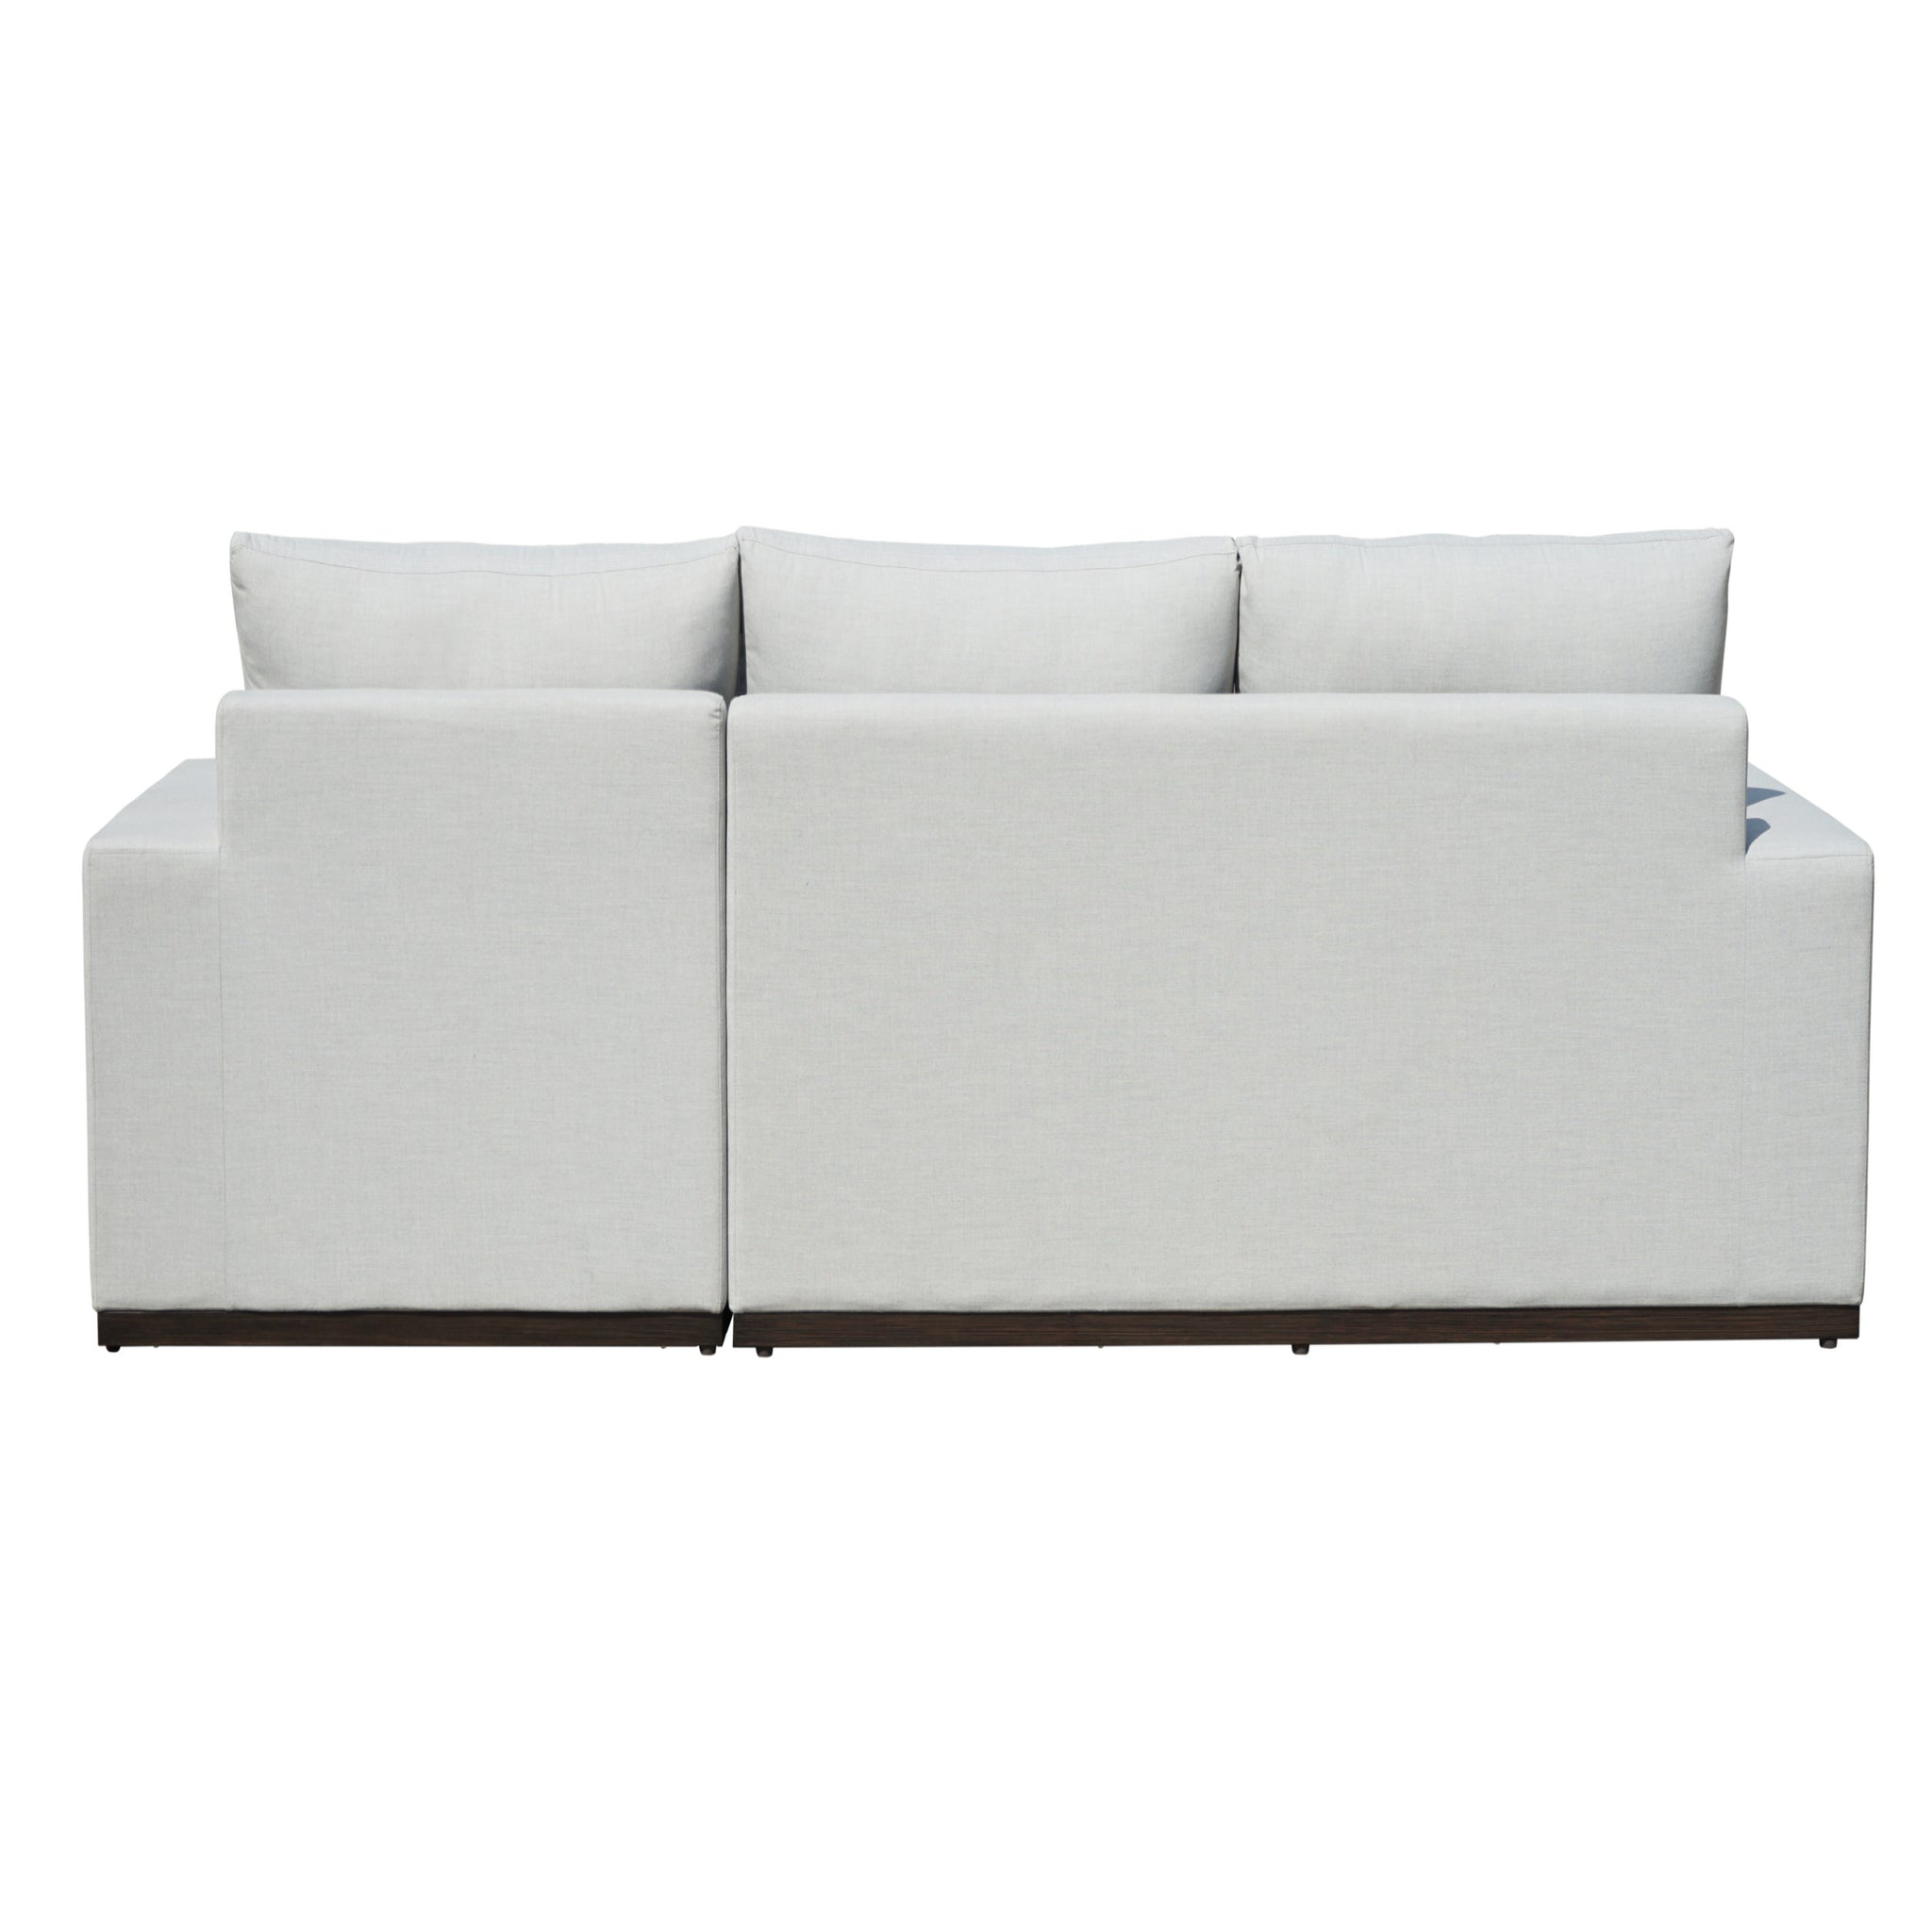 Luxurious Outdoor Chofa Sofa Chaise Generously